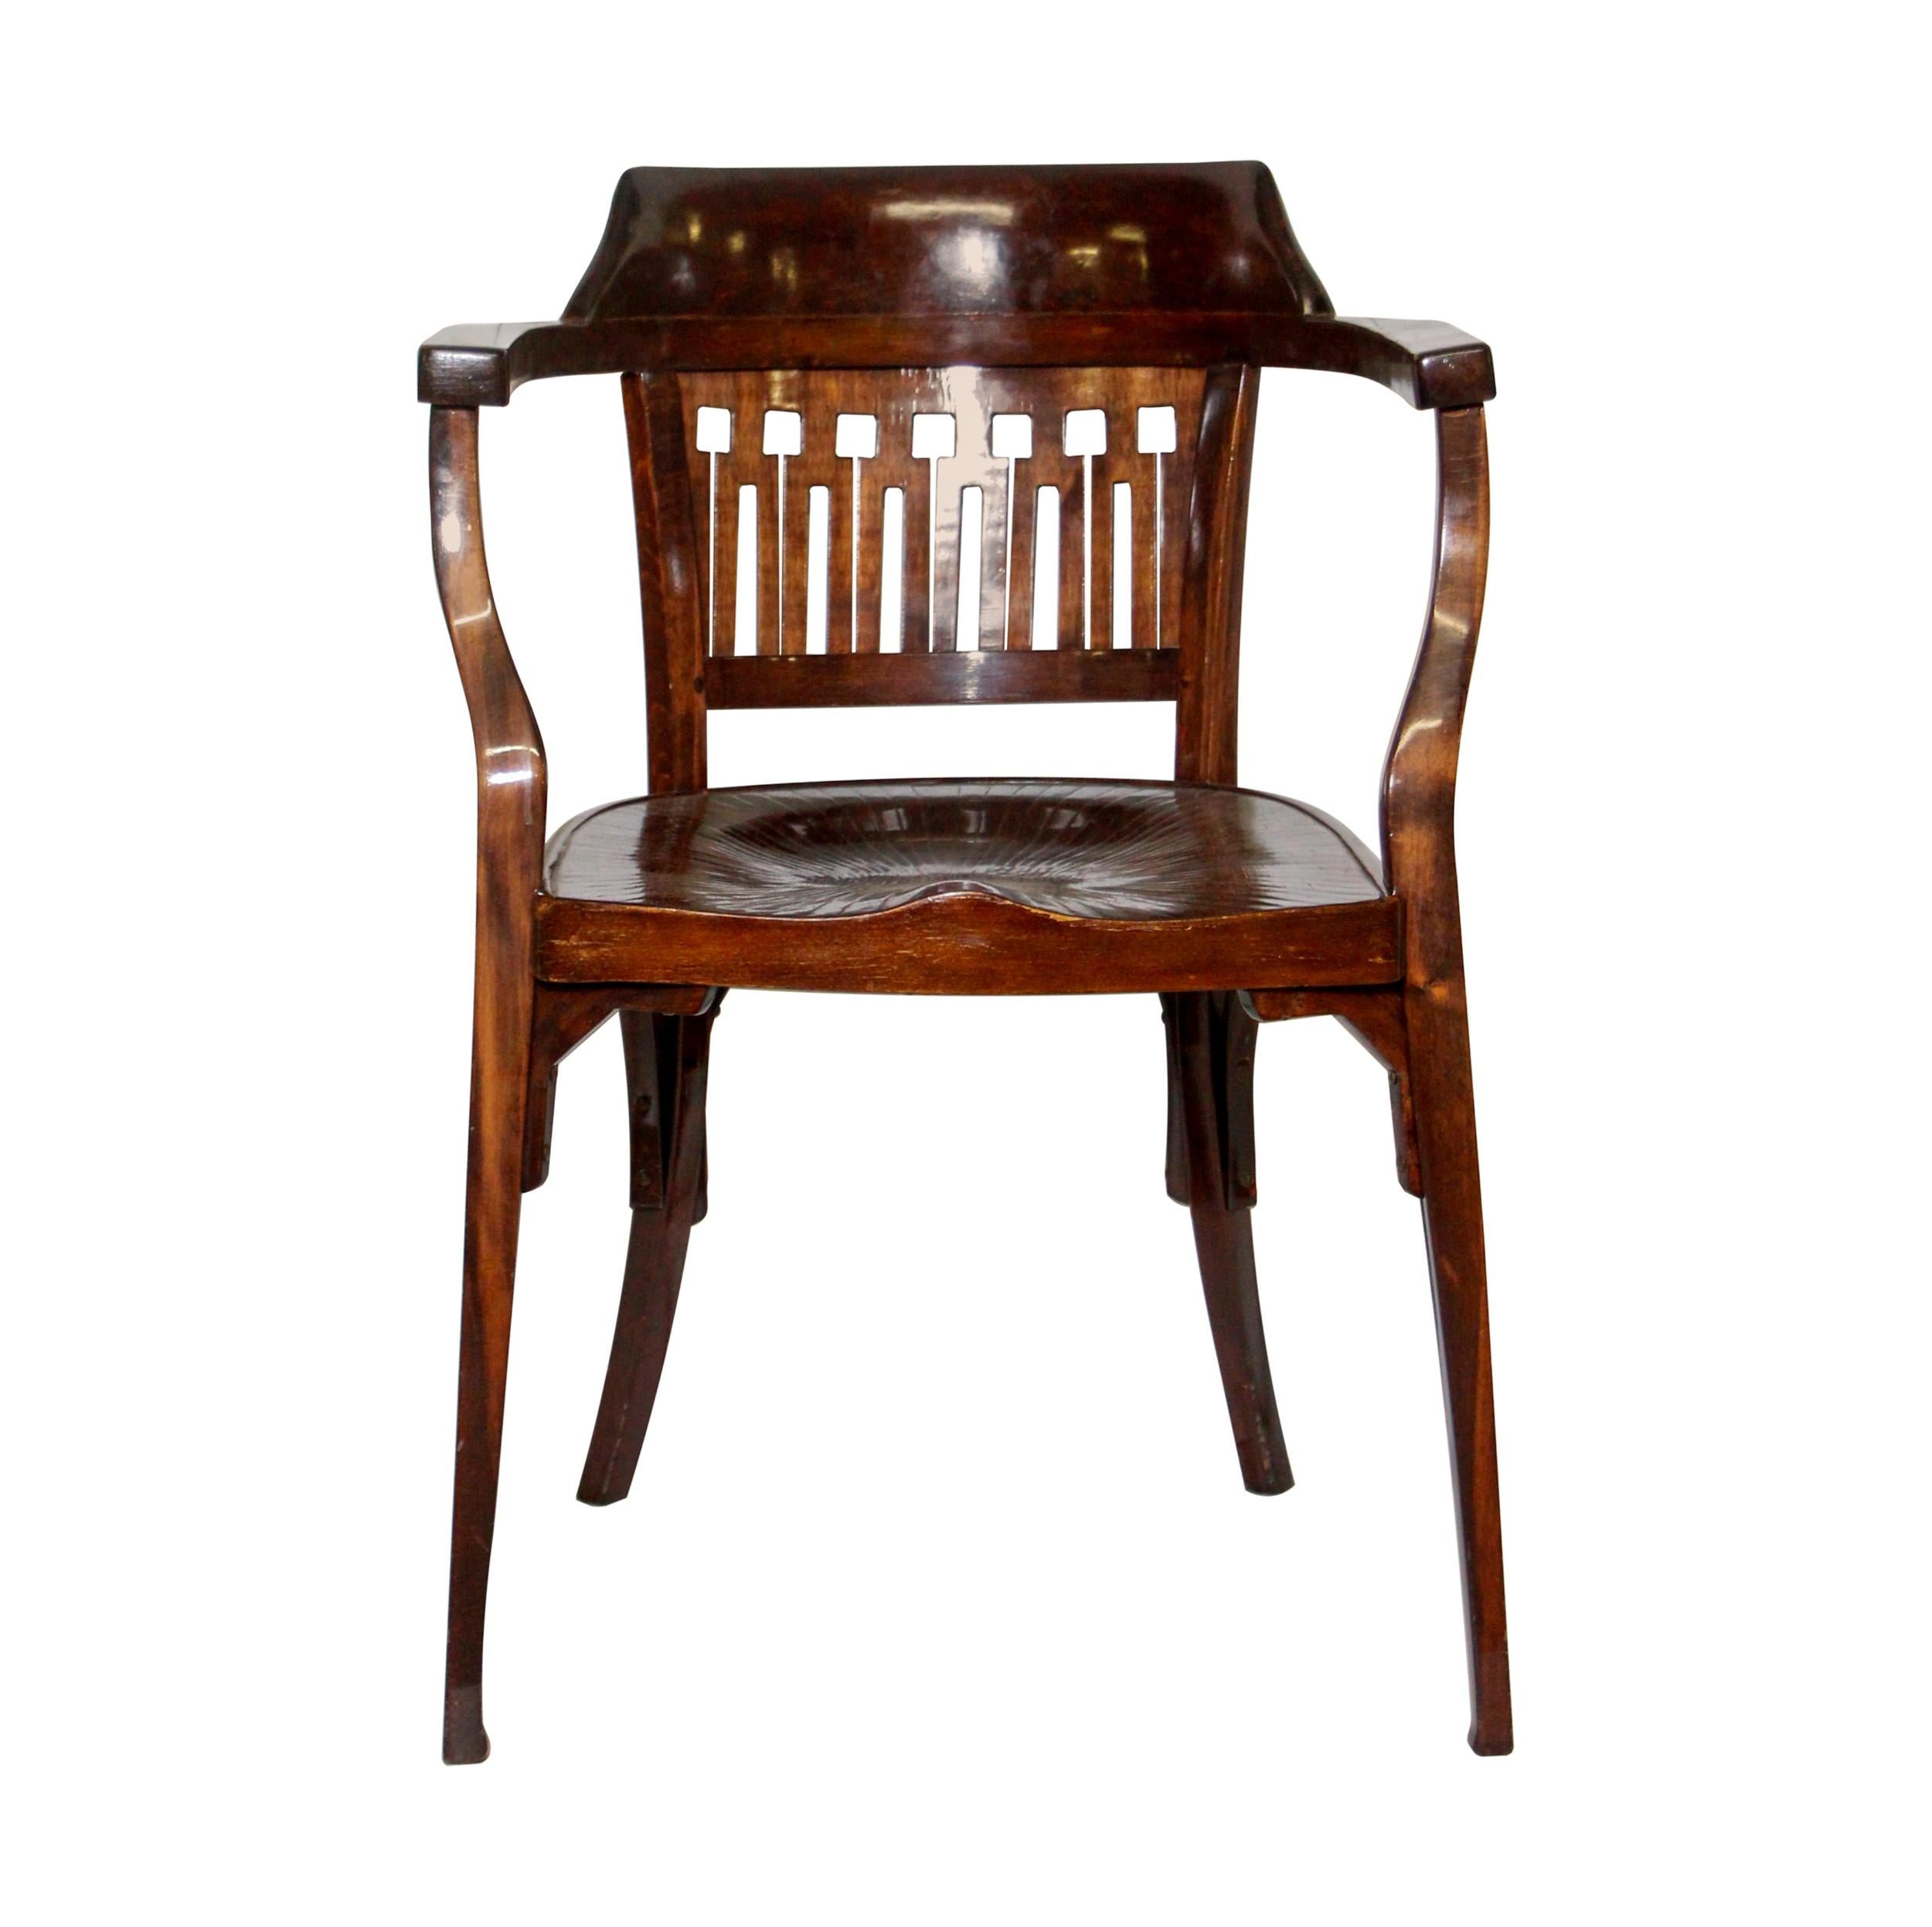 This secessionist Bauhaus bentwood armchair was designed by Otto Wagner and manufactured by Jacob & Josef Kohn.  J & J Kohn manufactured this chair from 1905-1915 in Vienna, Austria.  It has a nice dark-tone stain with a stylish curved back.  One